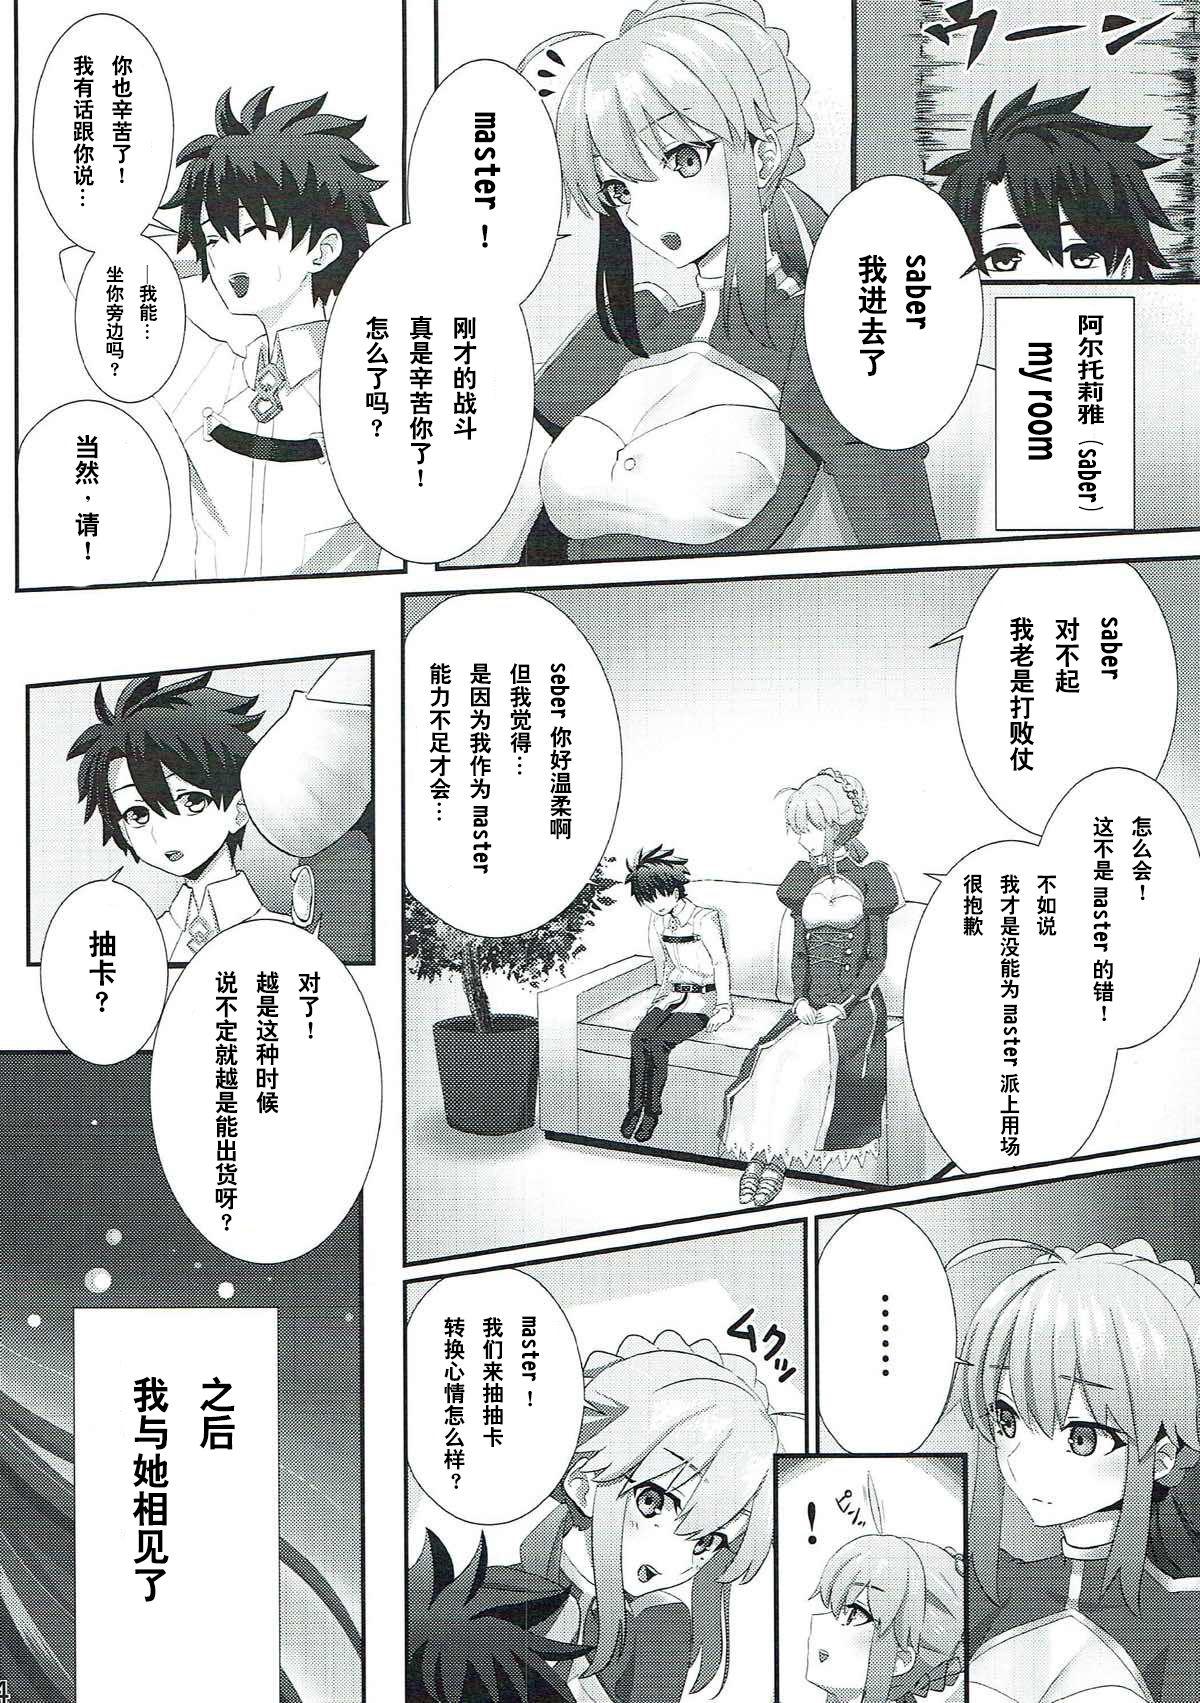 Flaca Scathach-san to Issho - Fate grand order Sex - Page 3